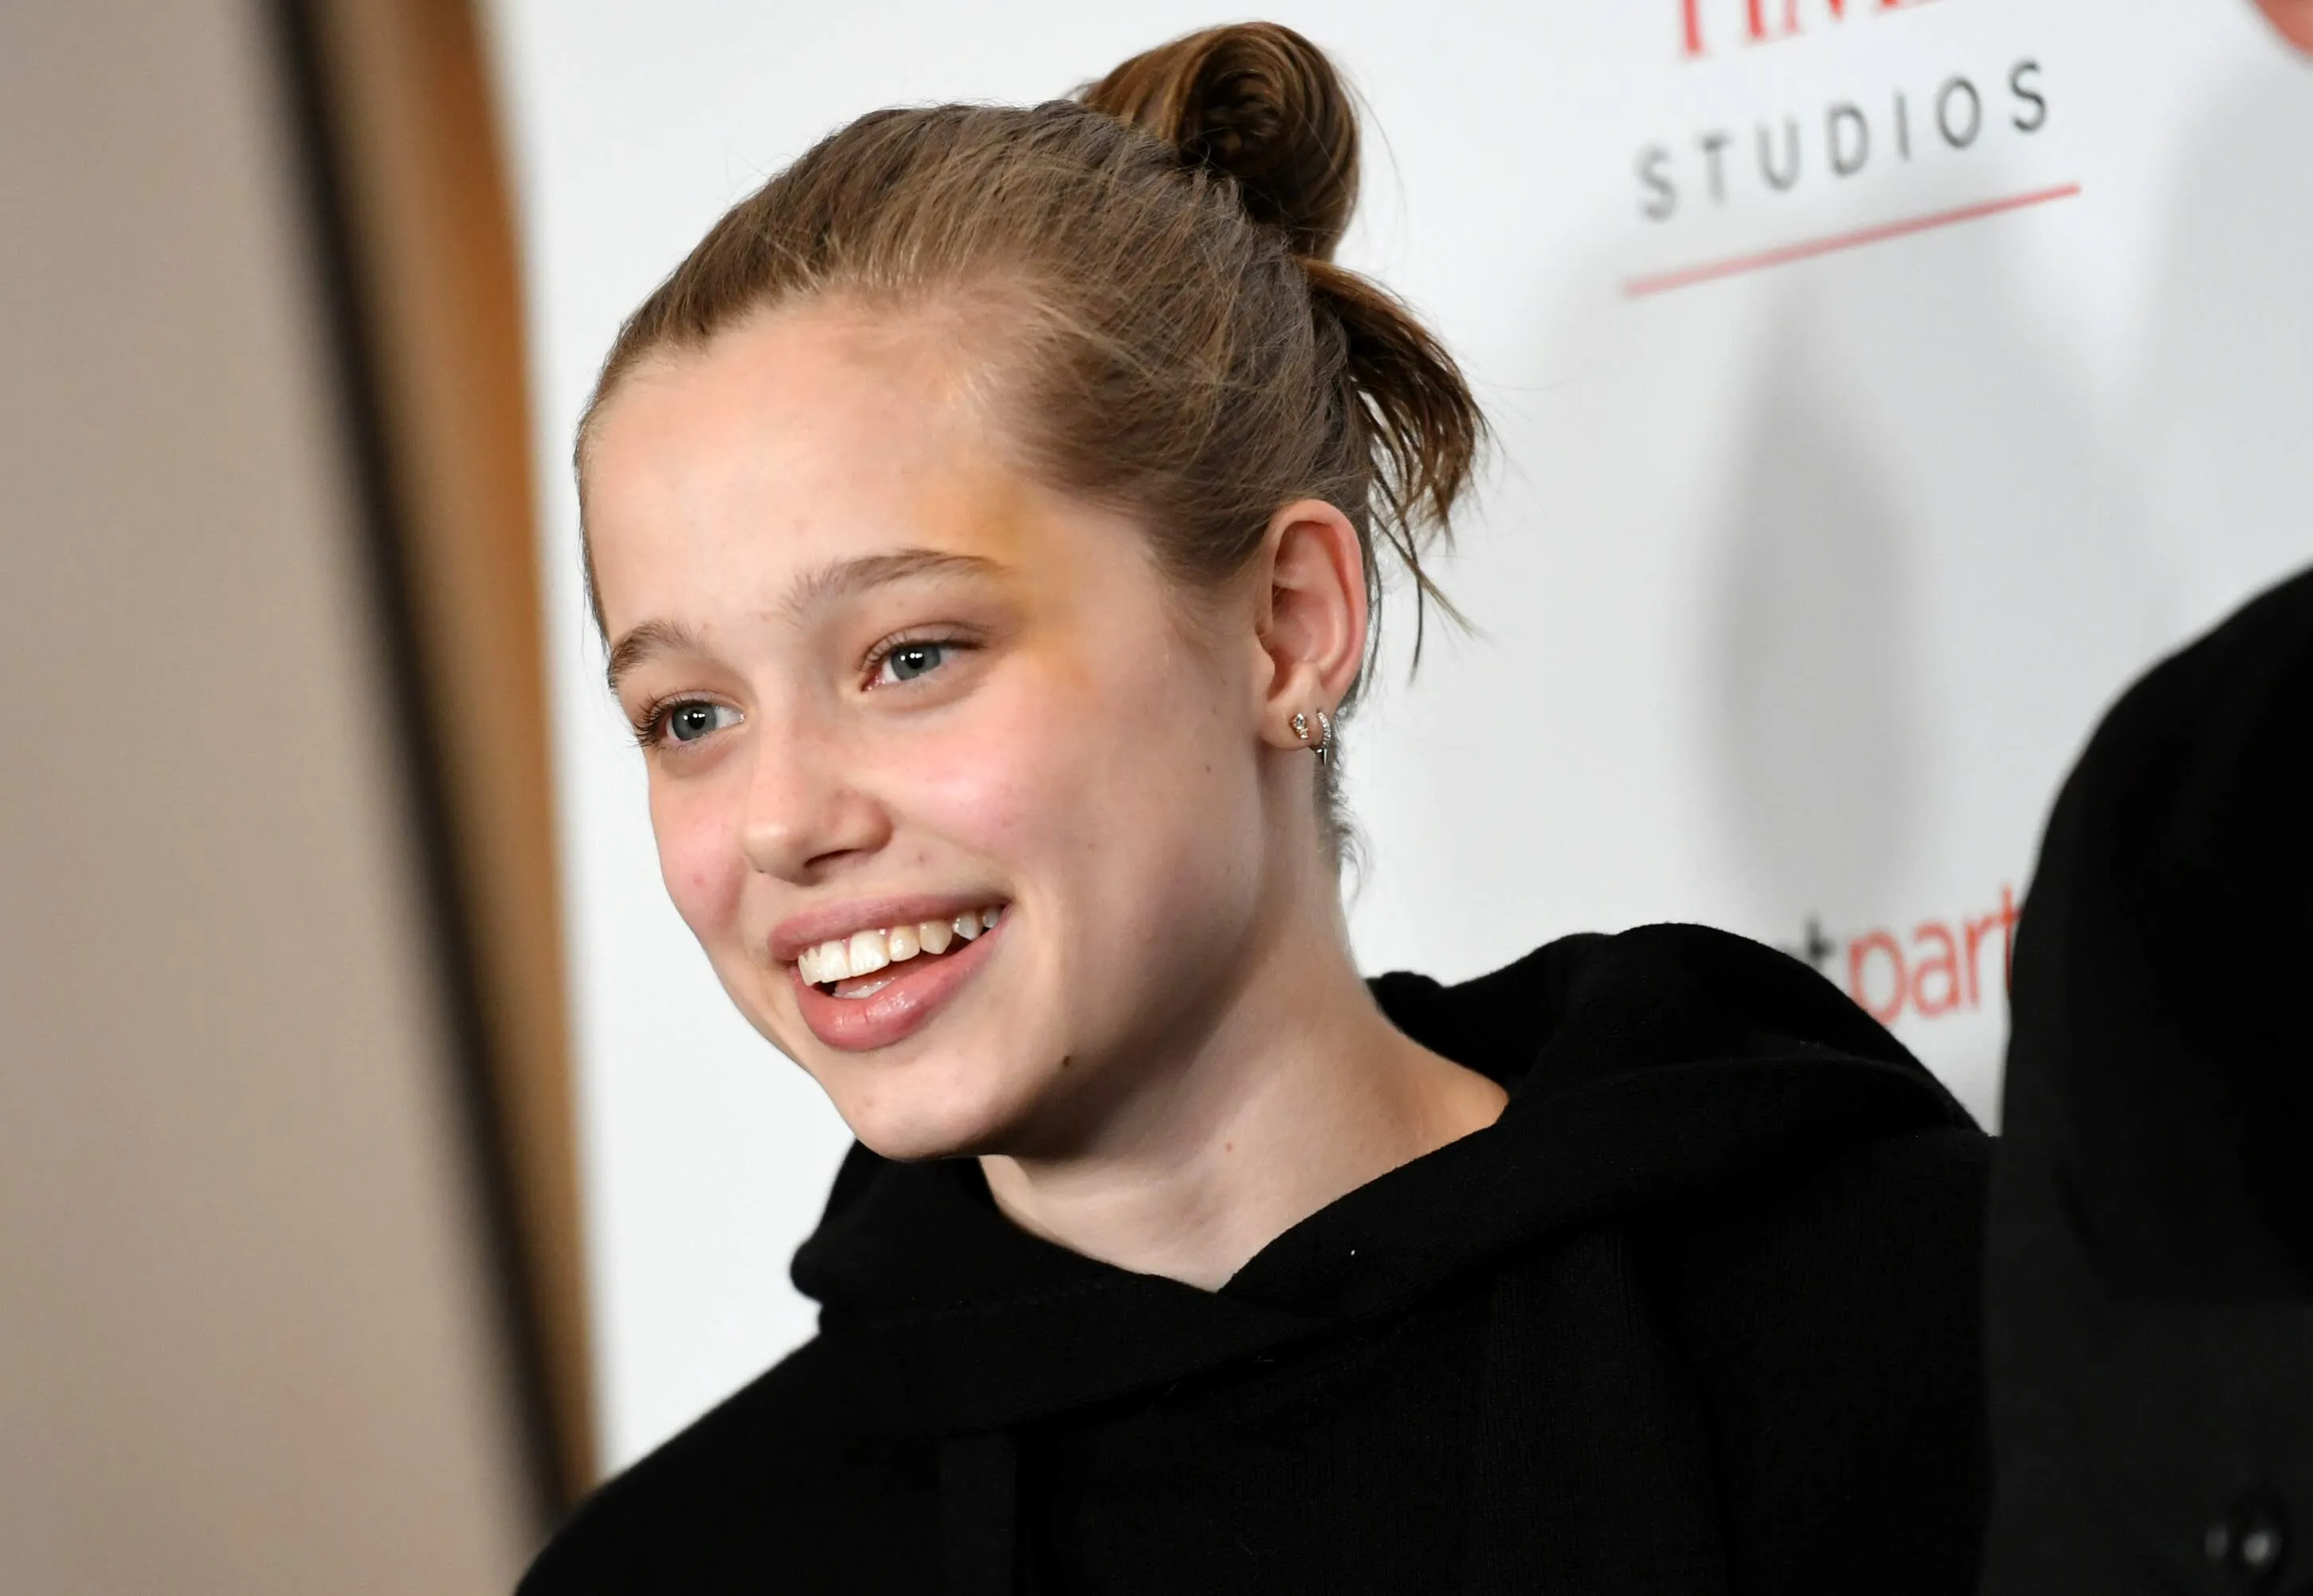 Angelina Jolie and Brad Pitt's daughter, Shiloh Jolie-Pitt, attends a movie premiere wearing a black hoodie